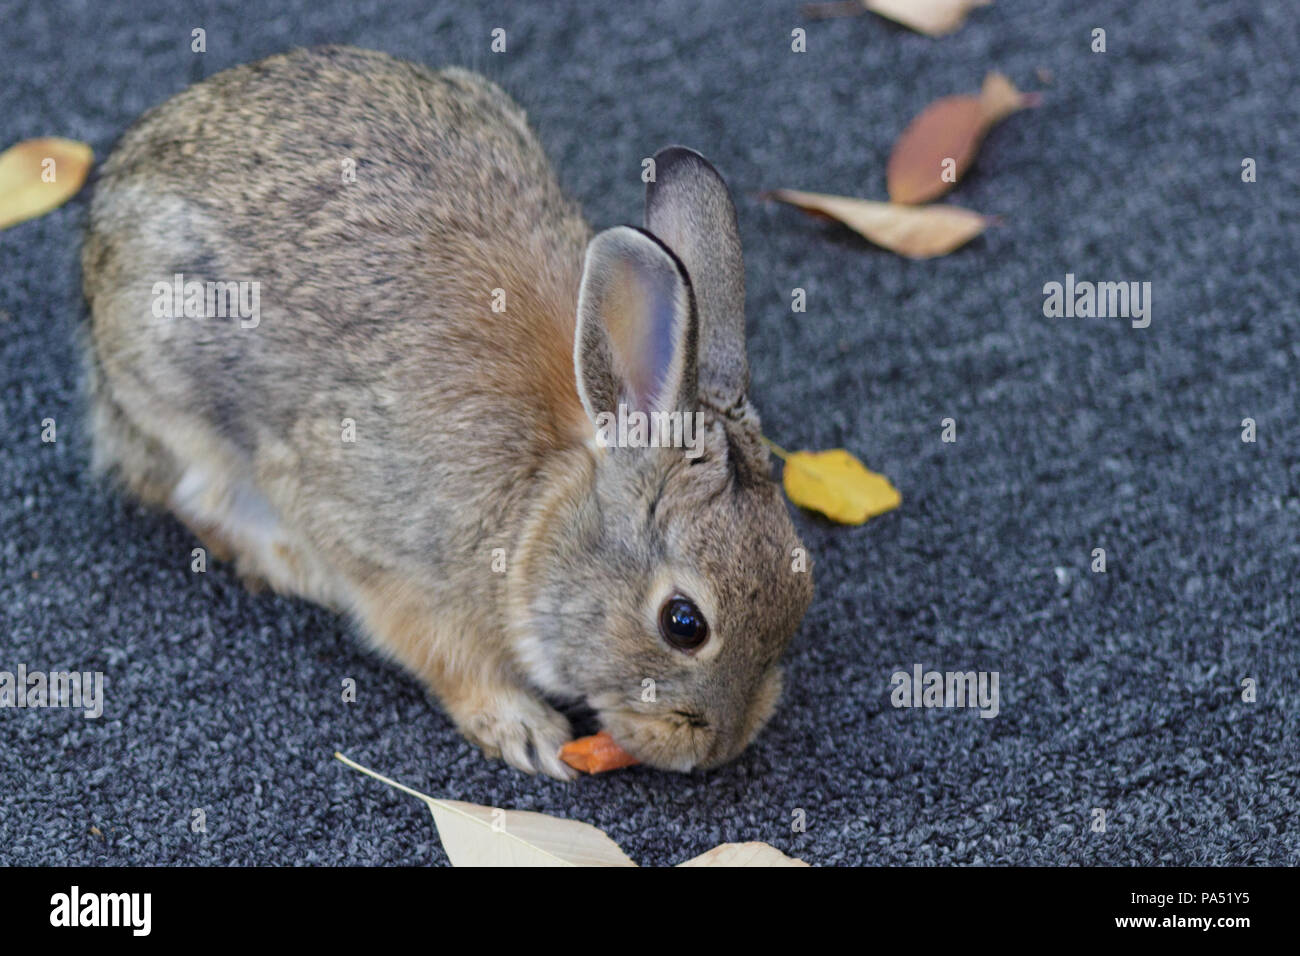 A cute little bunny rabbit having a carrot for a snack Stock Photo